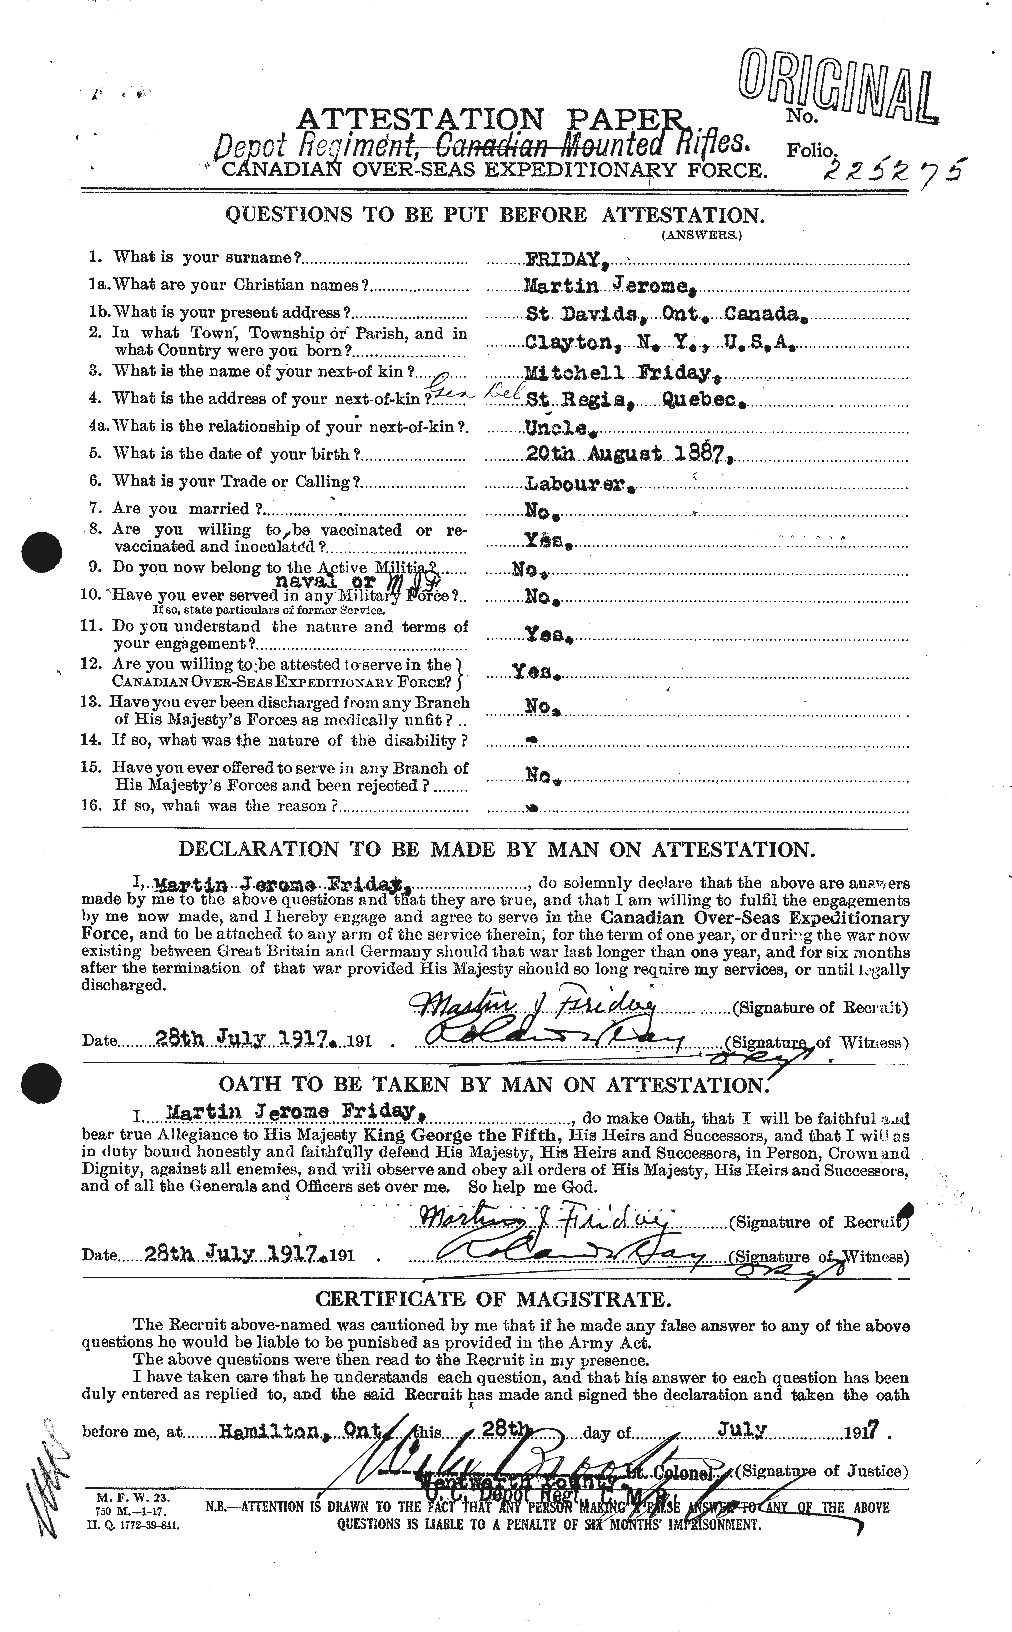 Personnel Records of the First World War - CEF 336217a